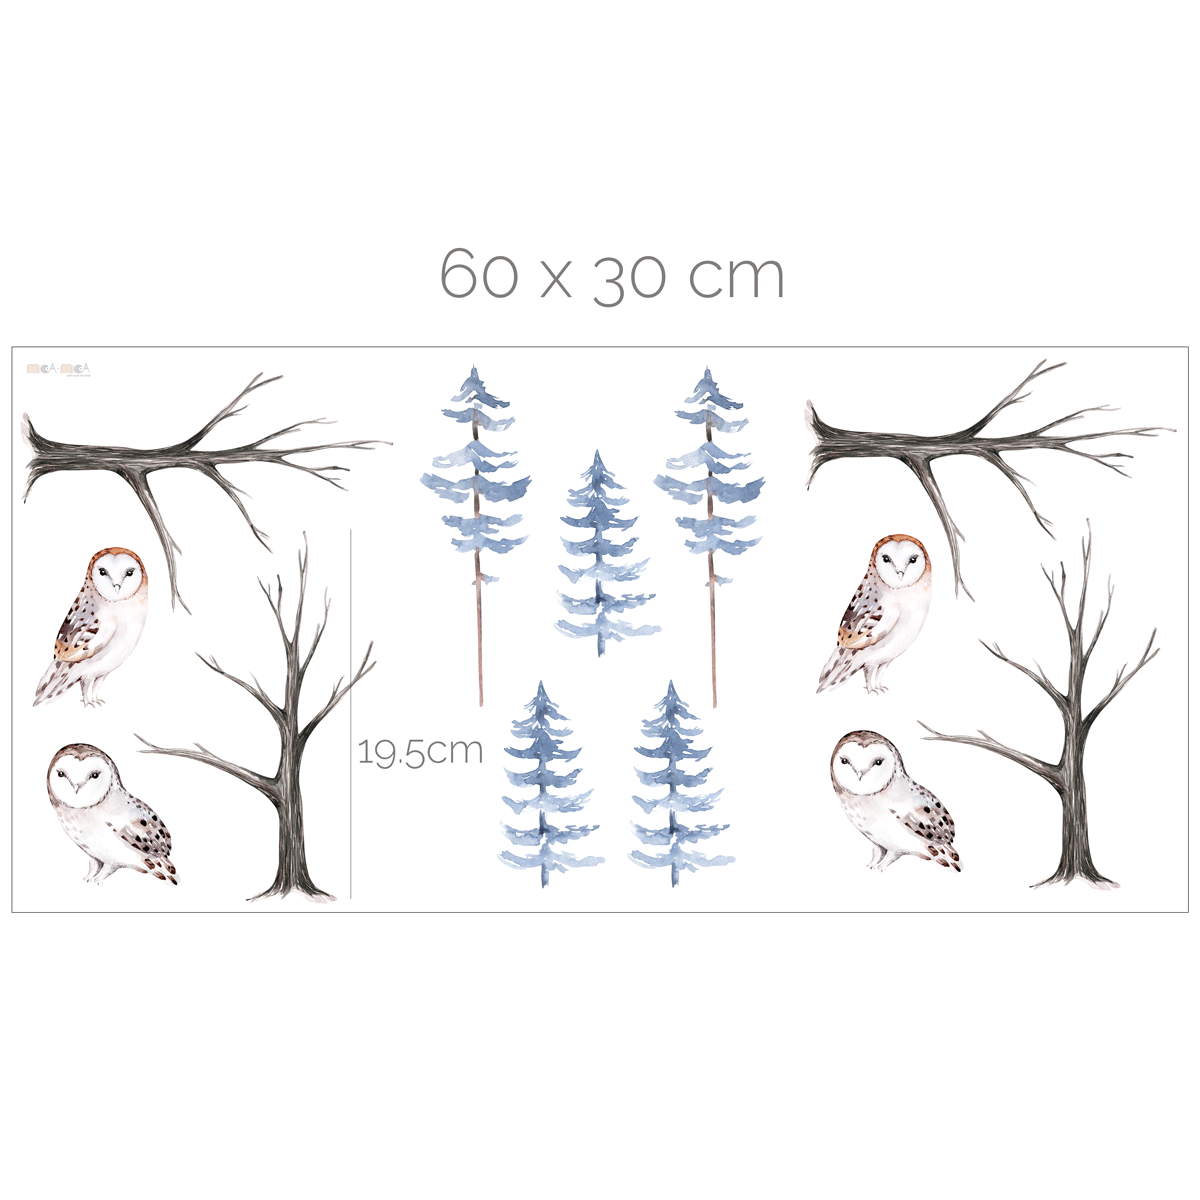 Woodland wall stickers - Watercolour woodland owls